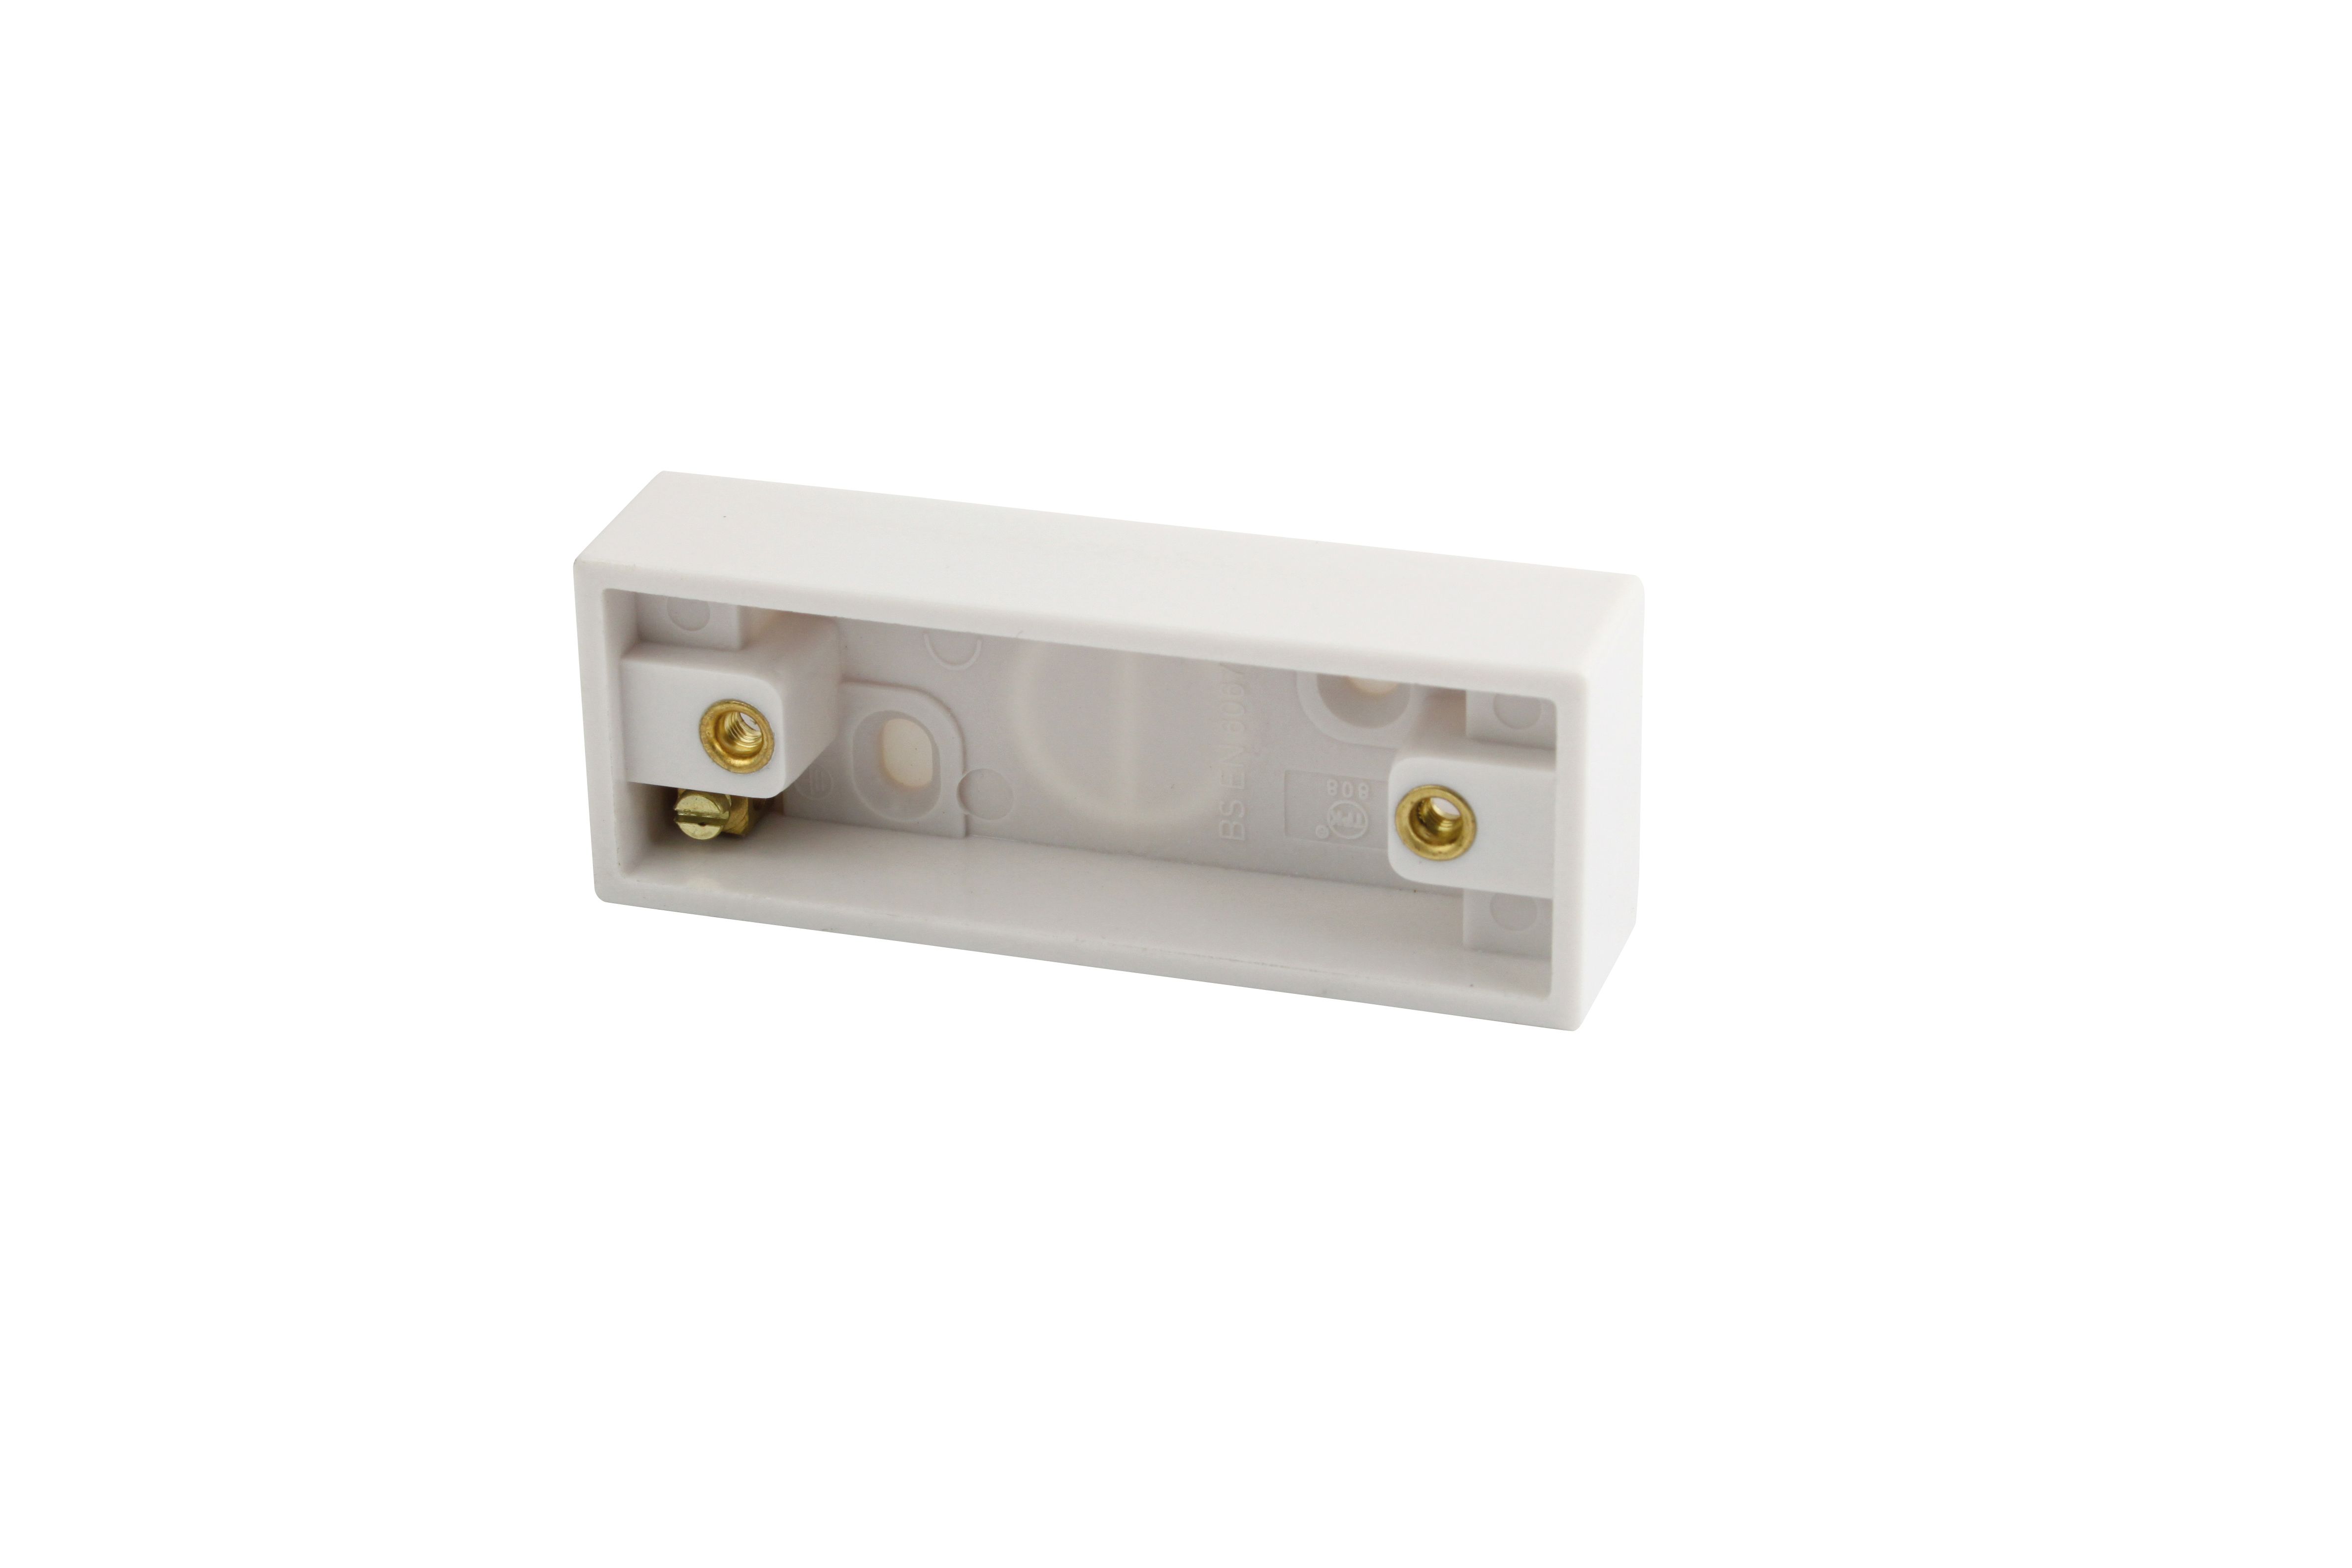 Image of Wickes 1 Gang Architrave Pattress Box - White